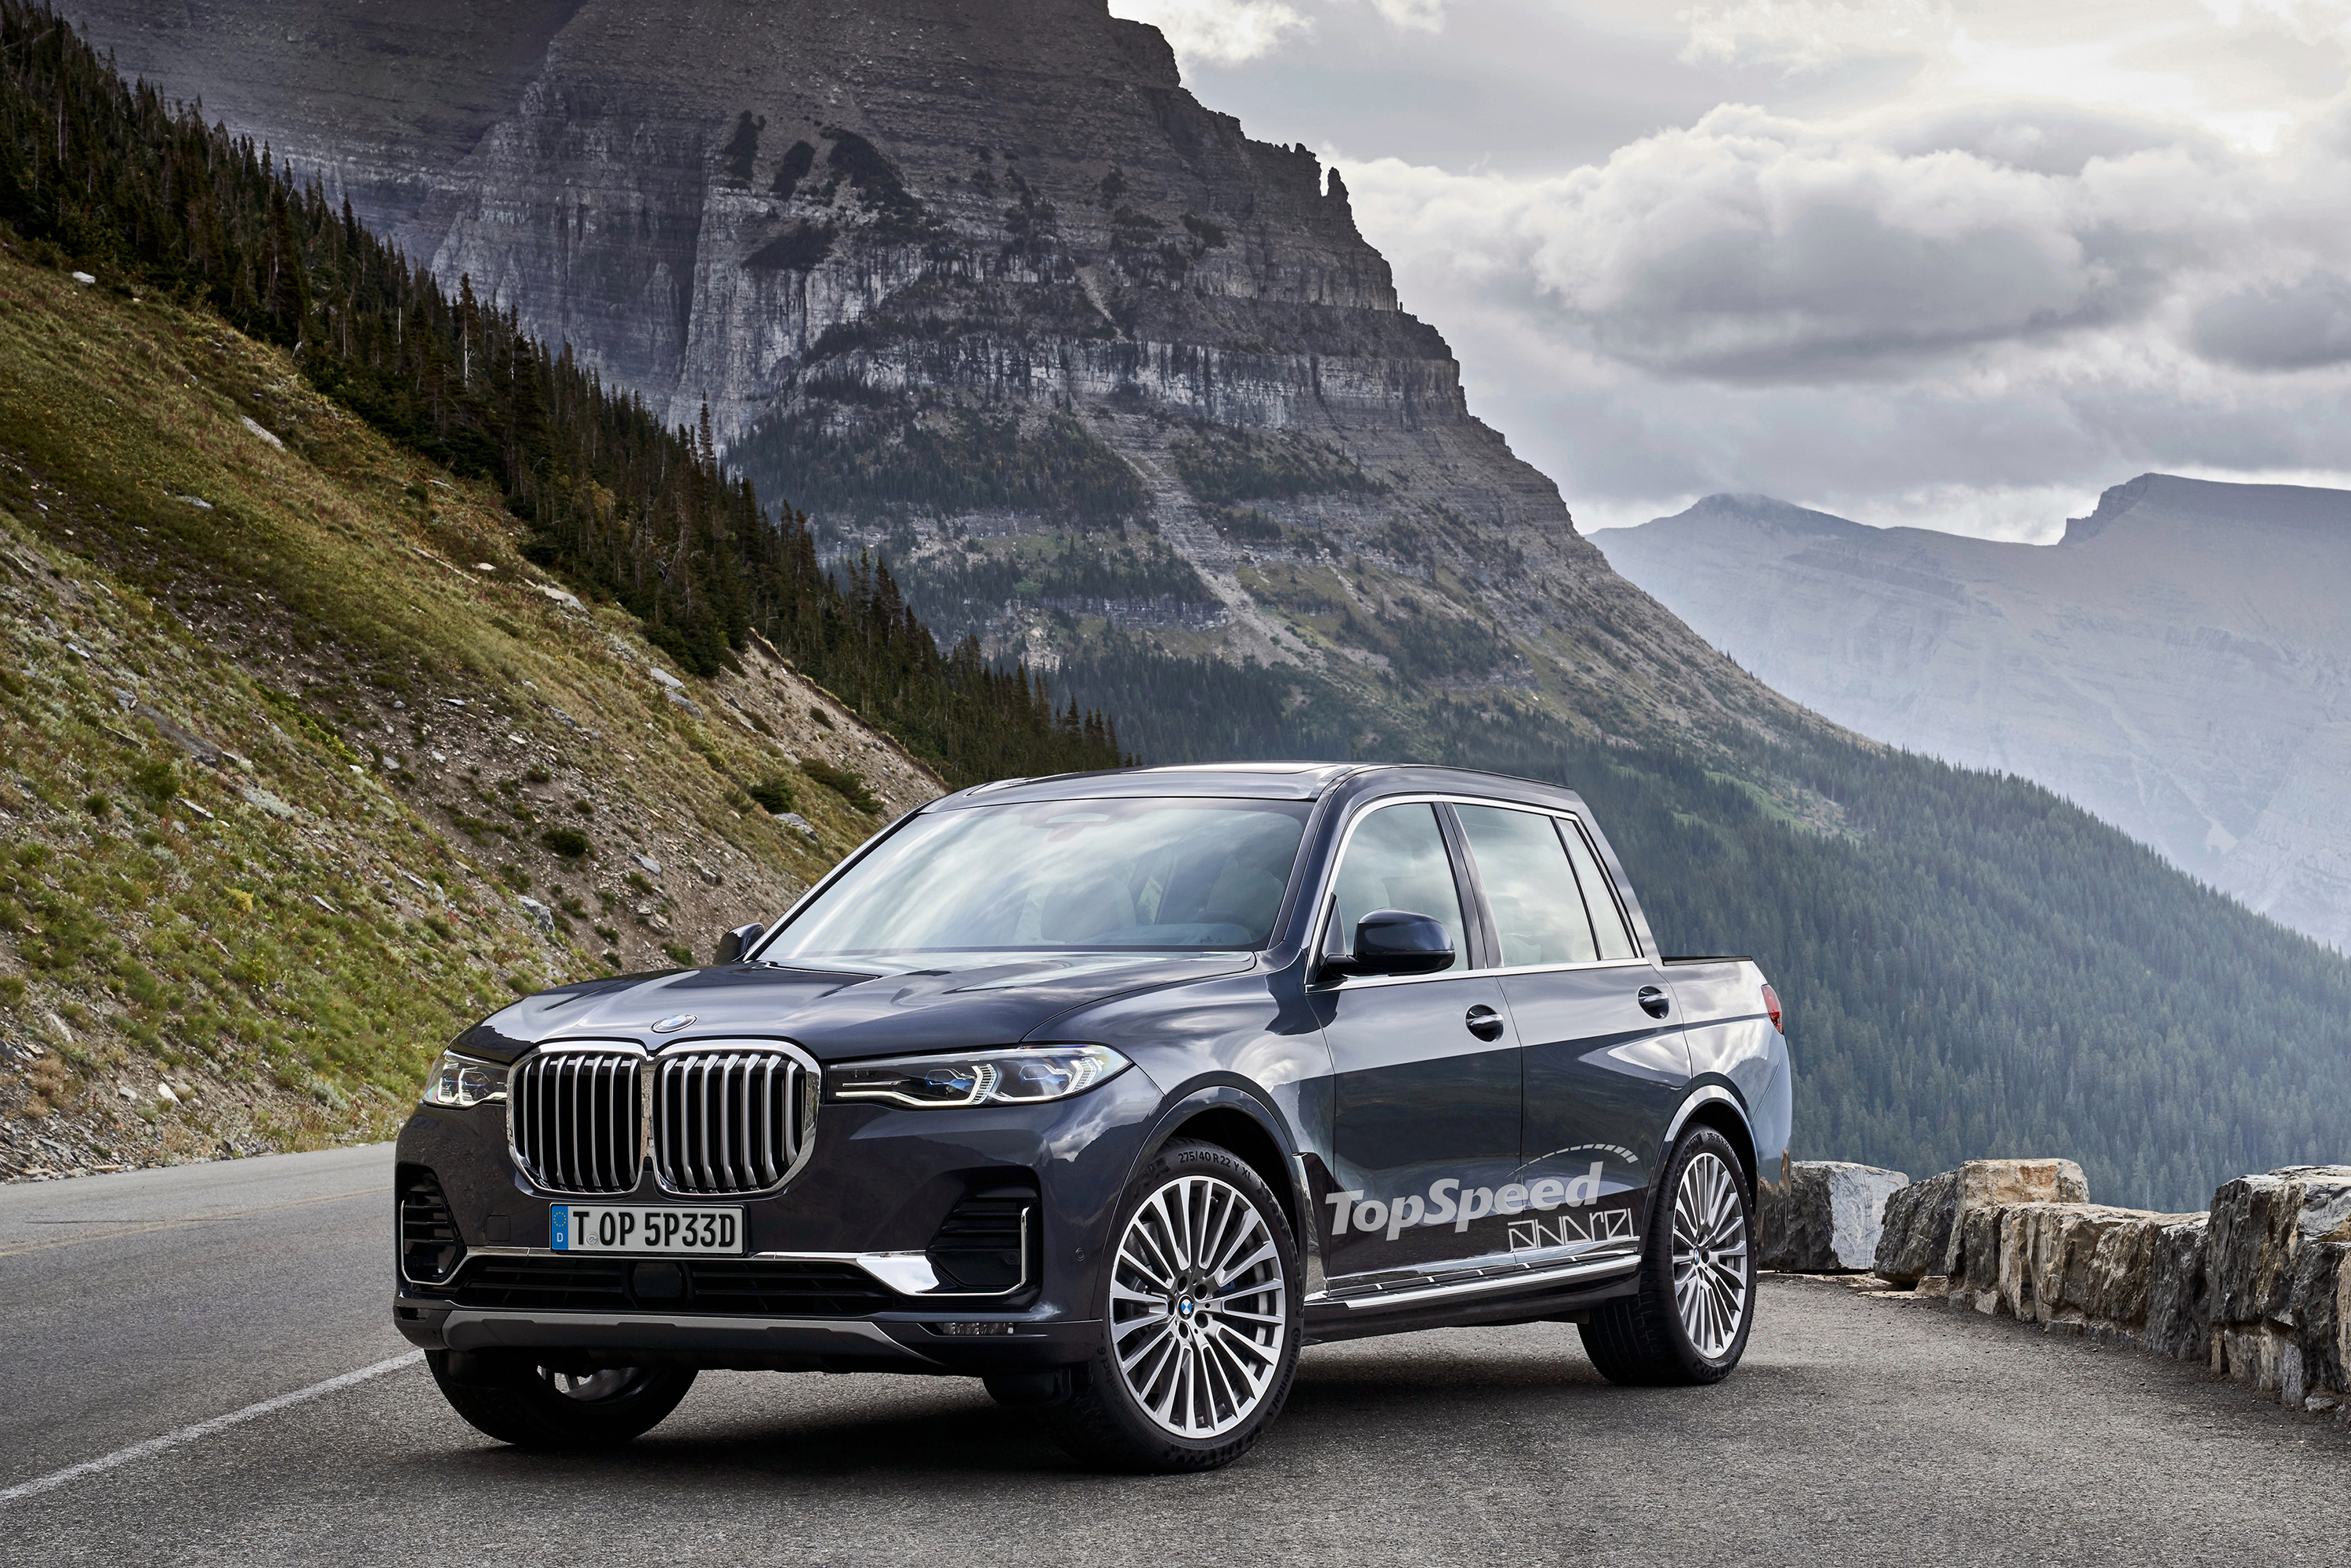 BMW X7 (G07) suv specifications